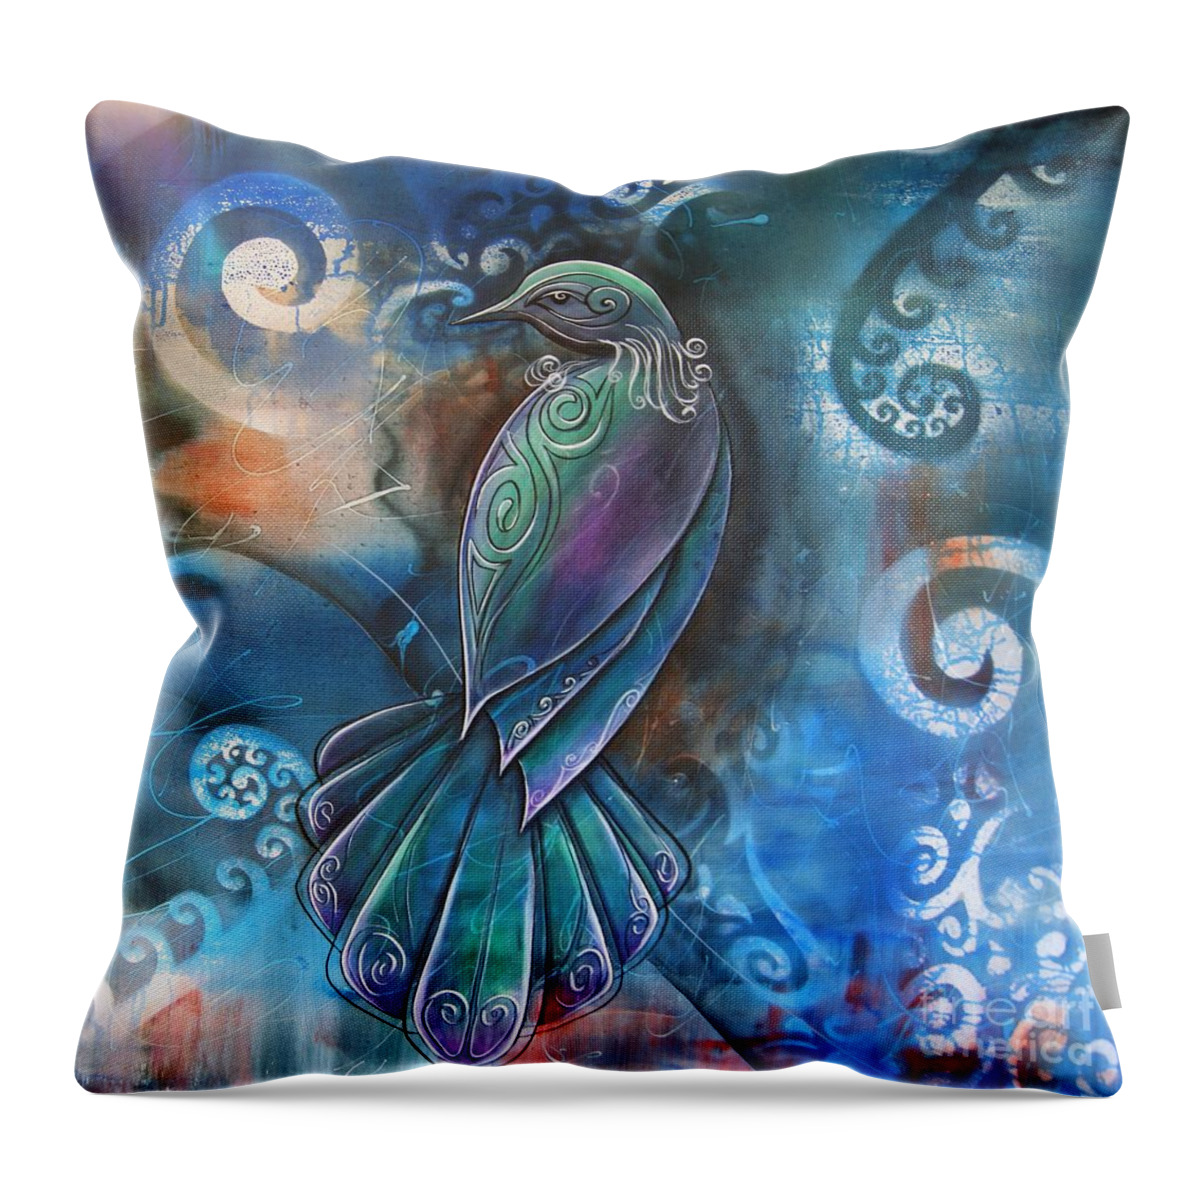 Tui Throw Pillow featuring the photograph Tui 4 by Reina Cottier